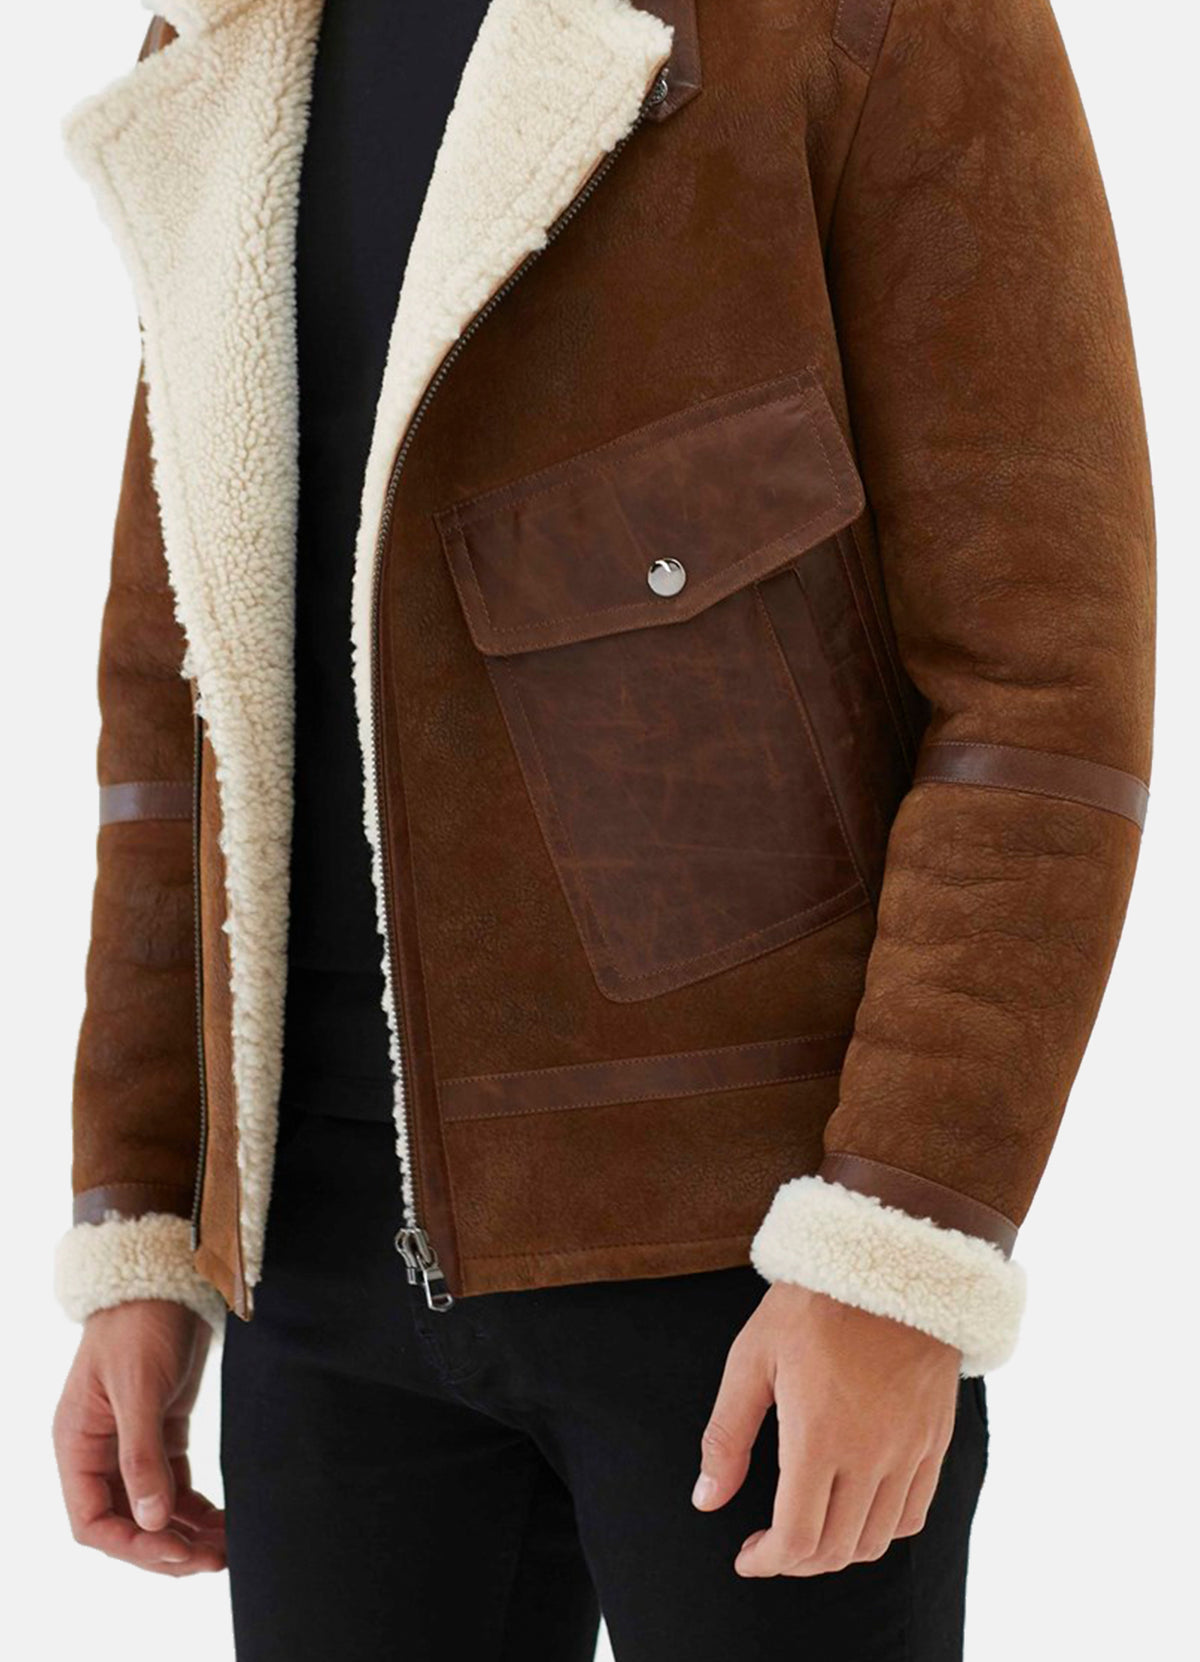 Mens Aviator Brown and White Shearling Leather Jacket